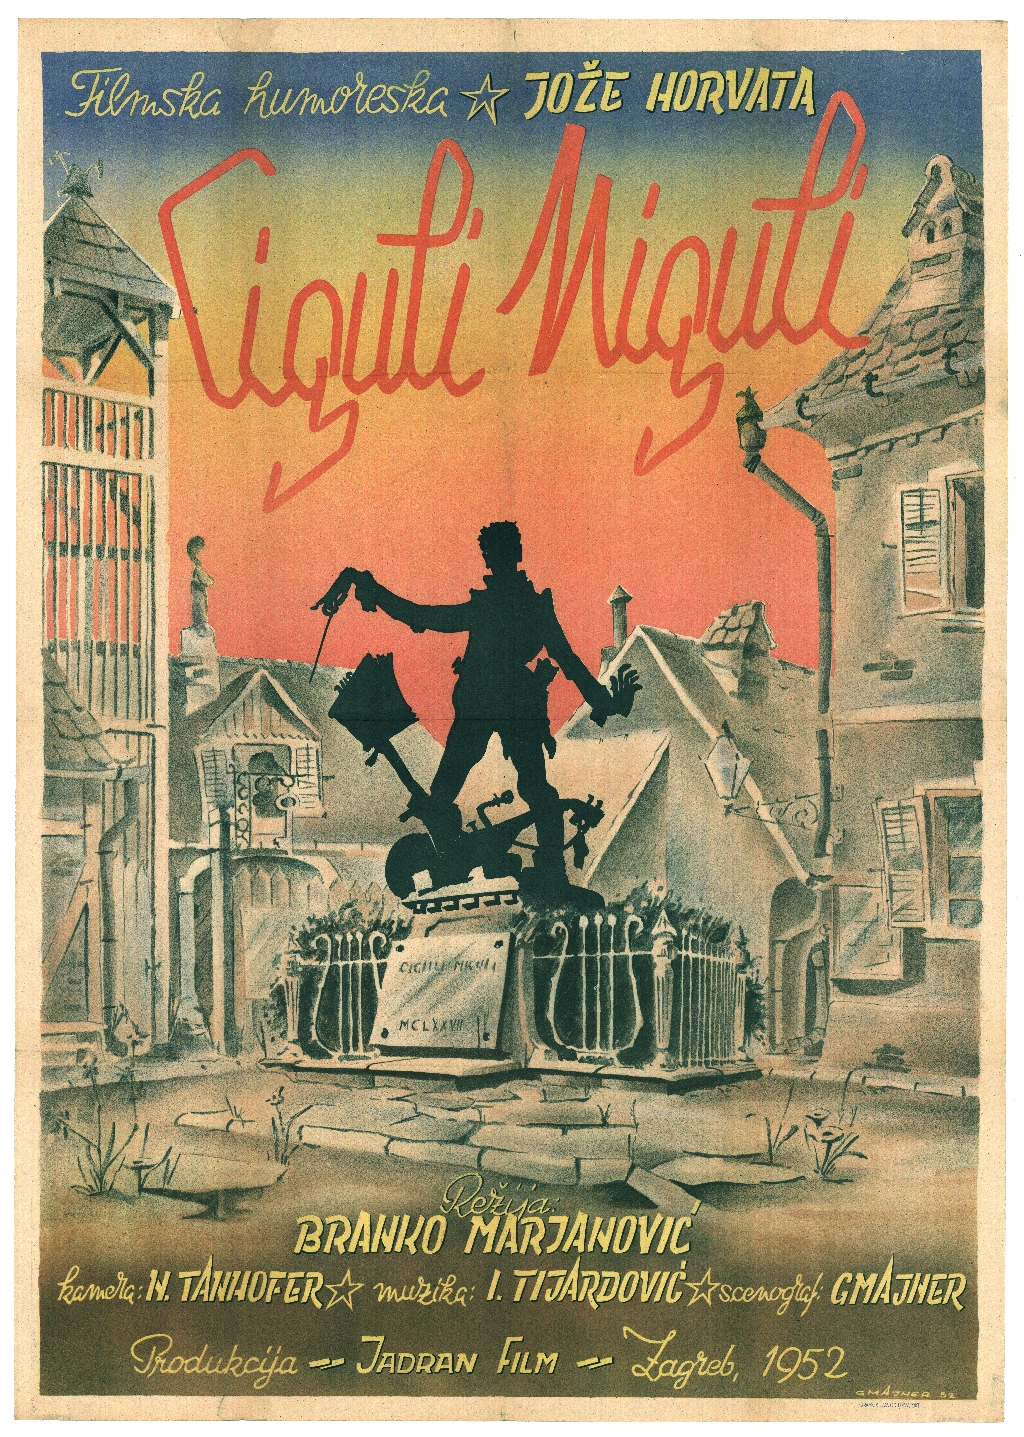 Poster for the movie Ciguli miguli from 1952, the first banned film in socialist Croatia. The film, directed by Branko Marjanović and written by Joža Horvat, was meant to be the first satirical production in post-World War II Yugoslav cinema. It criticised Soviet-type bureaucracies. It was not granted a permit for public screening until 30 April 1977. It was broadcast for the first time on national television in 1989.